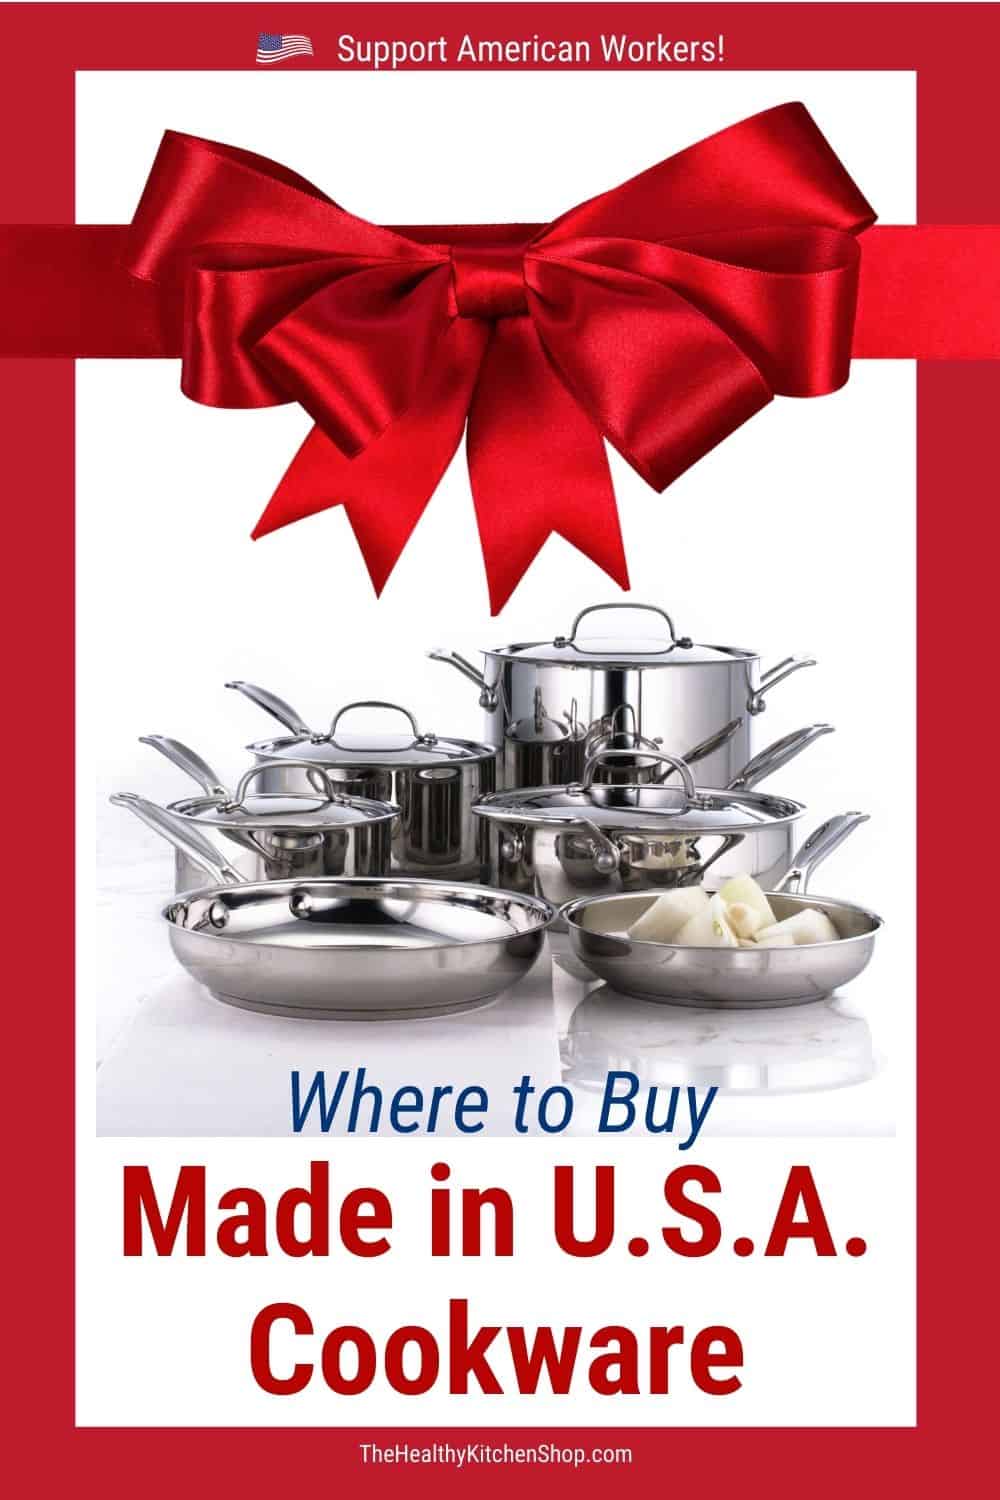 Where To Buy Made In U.S.A. Cookware